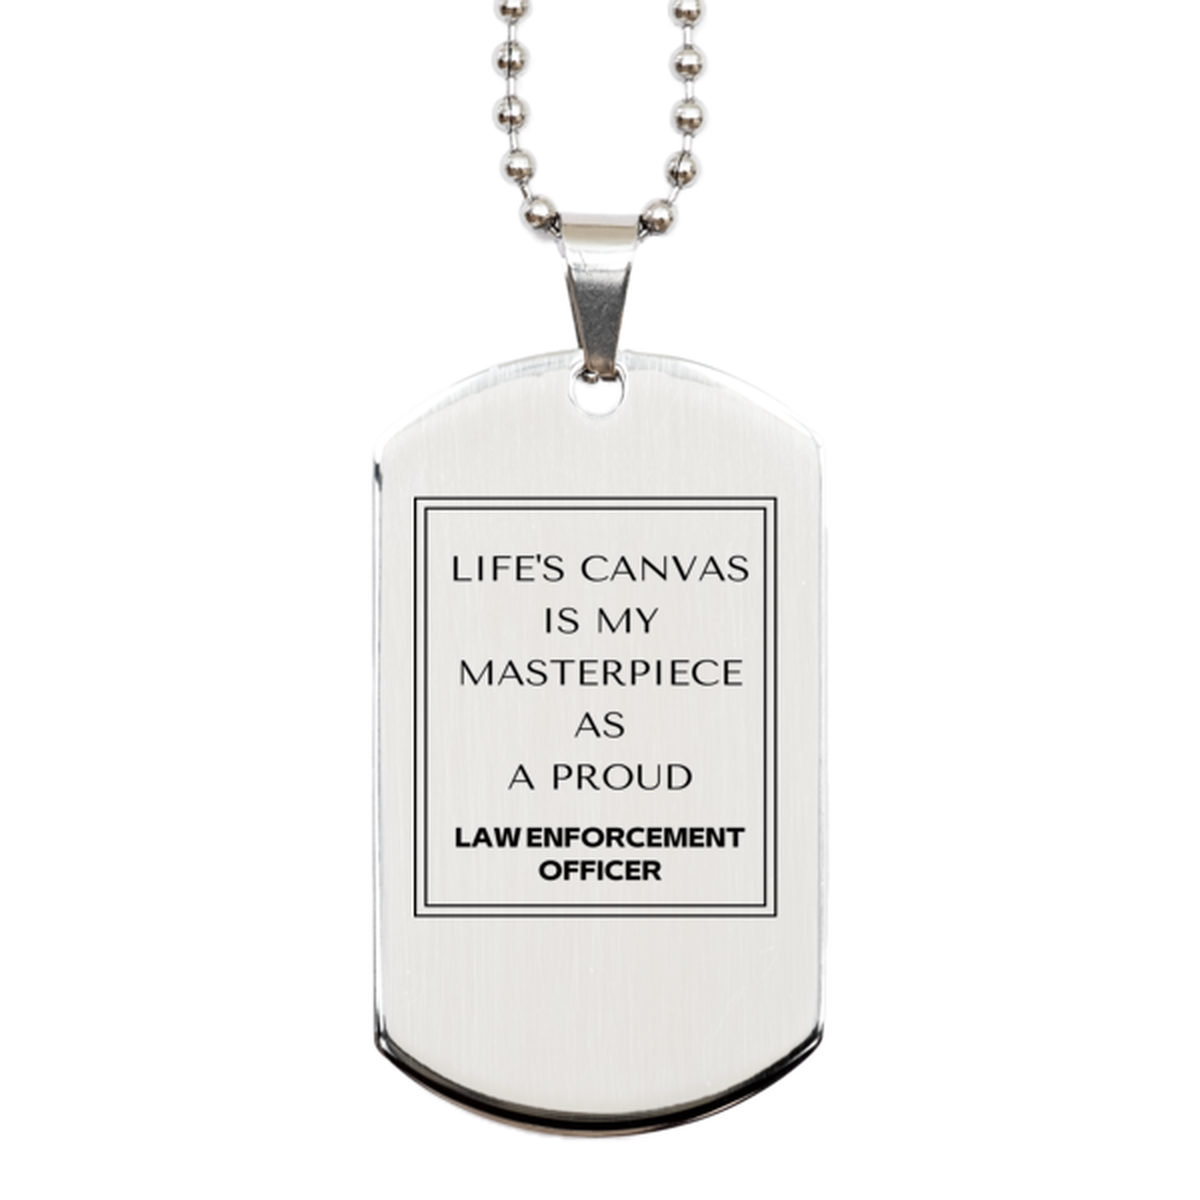 Proud Law Enforcement Officer Gifts, Life's canvas is my masterpiece, Epic Birthday Christmas Unique Silver Dog Tag For Law Enforcement Officer, Coworkers, Men, Women, Friends